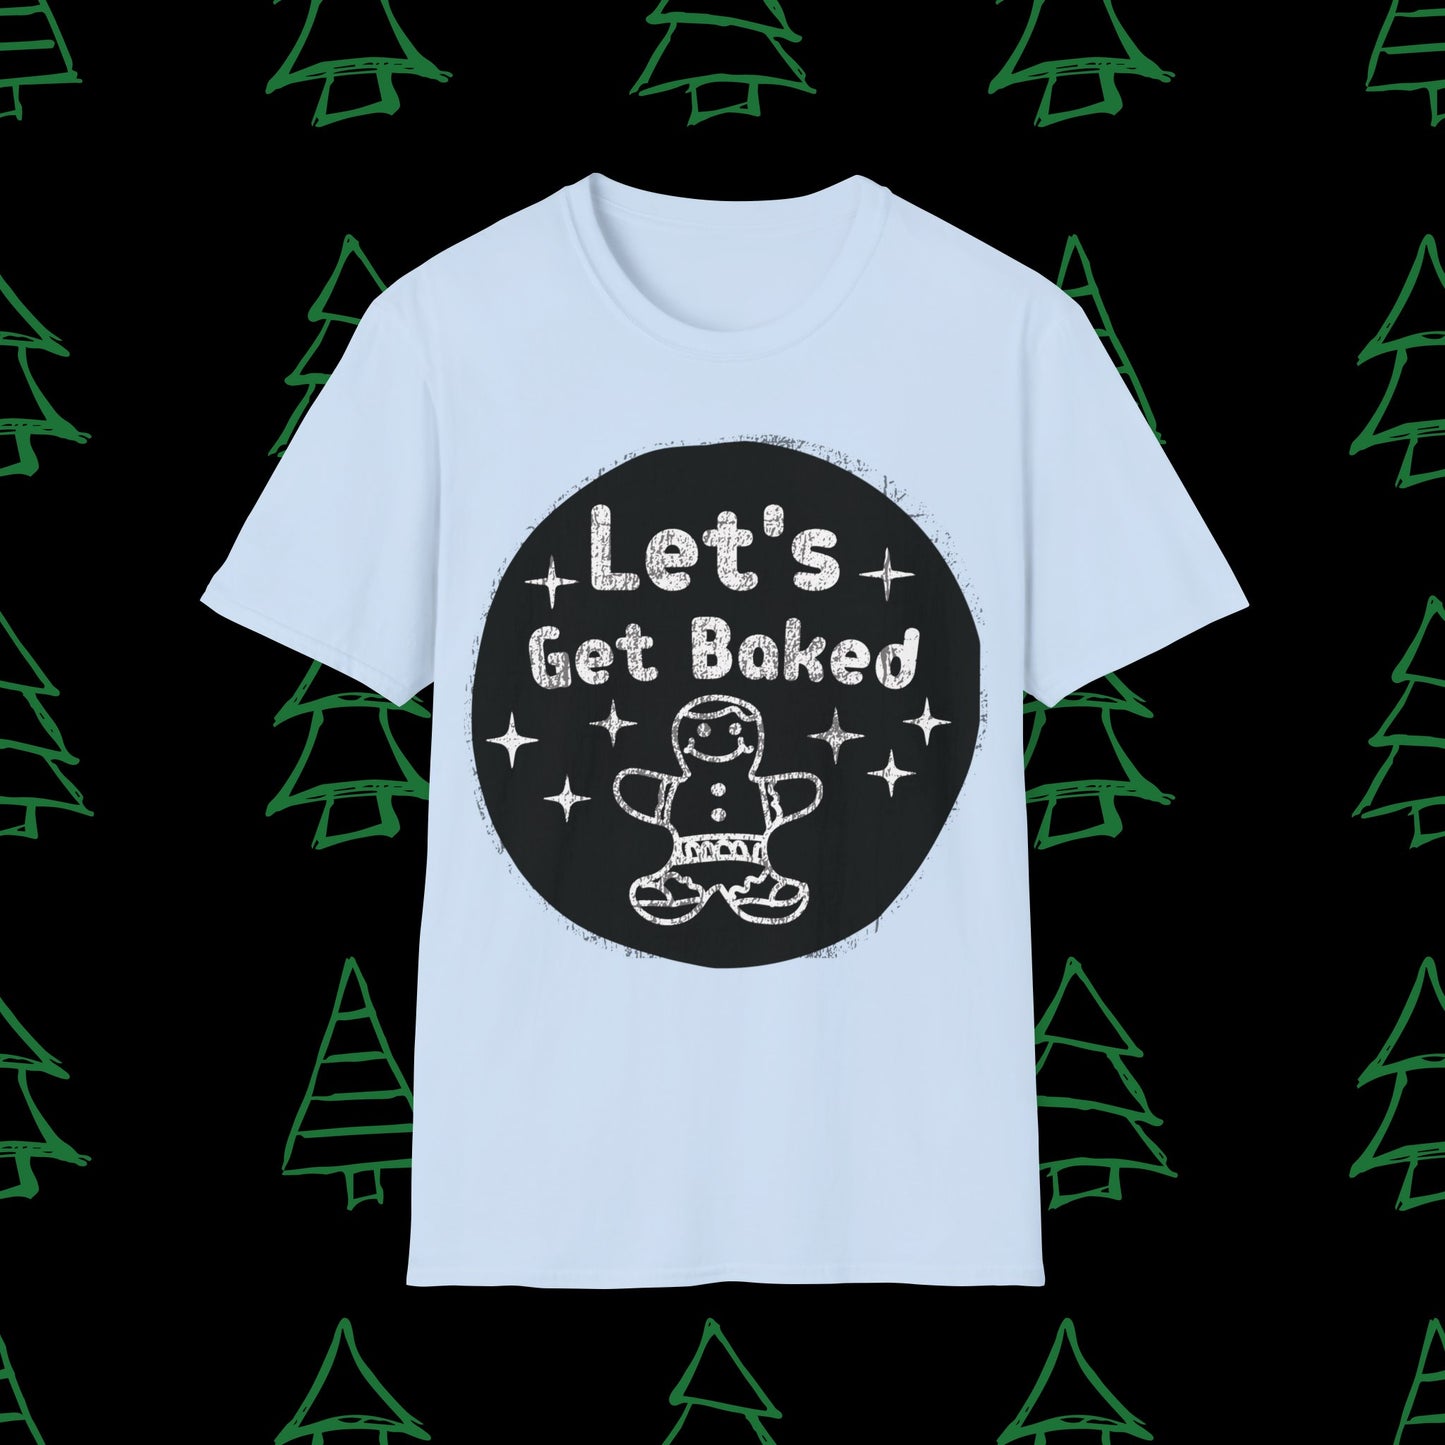 Christmas T-Shirt - Let's Get Baked - Mens Christmas Shirts - Adult Christmas TShirts T-Shirts Graphic Avenue Light Blue Adult Small 